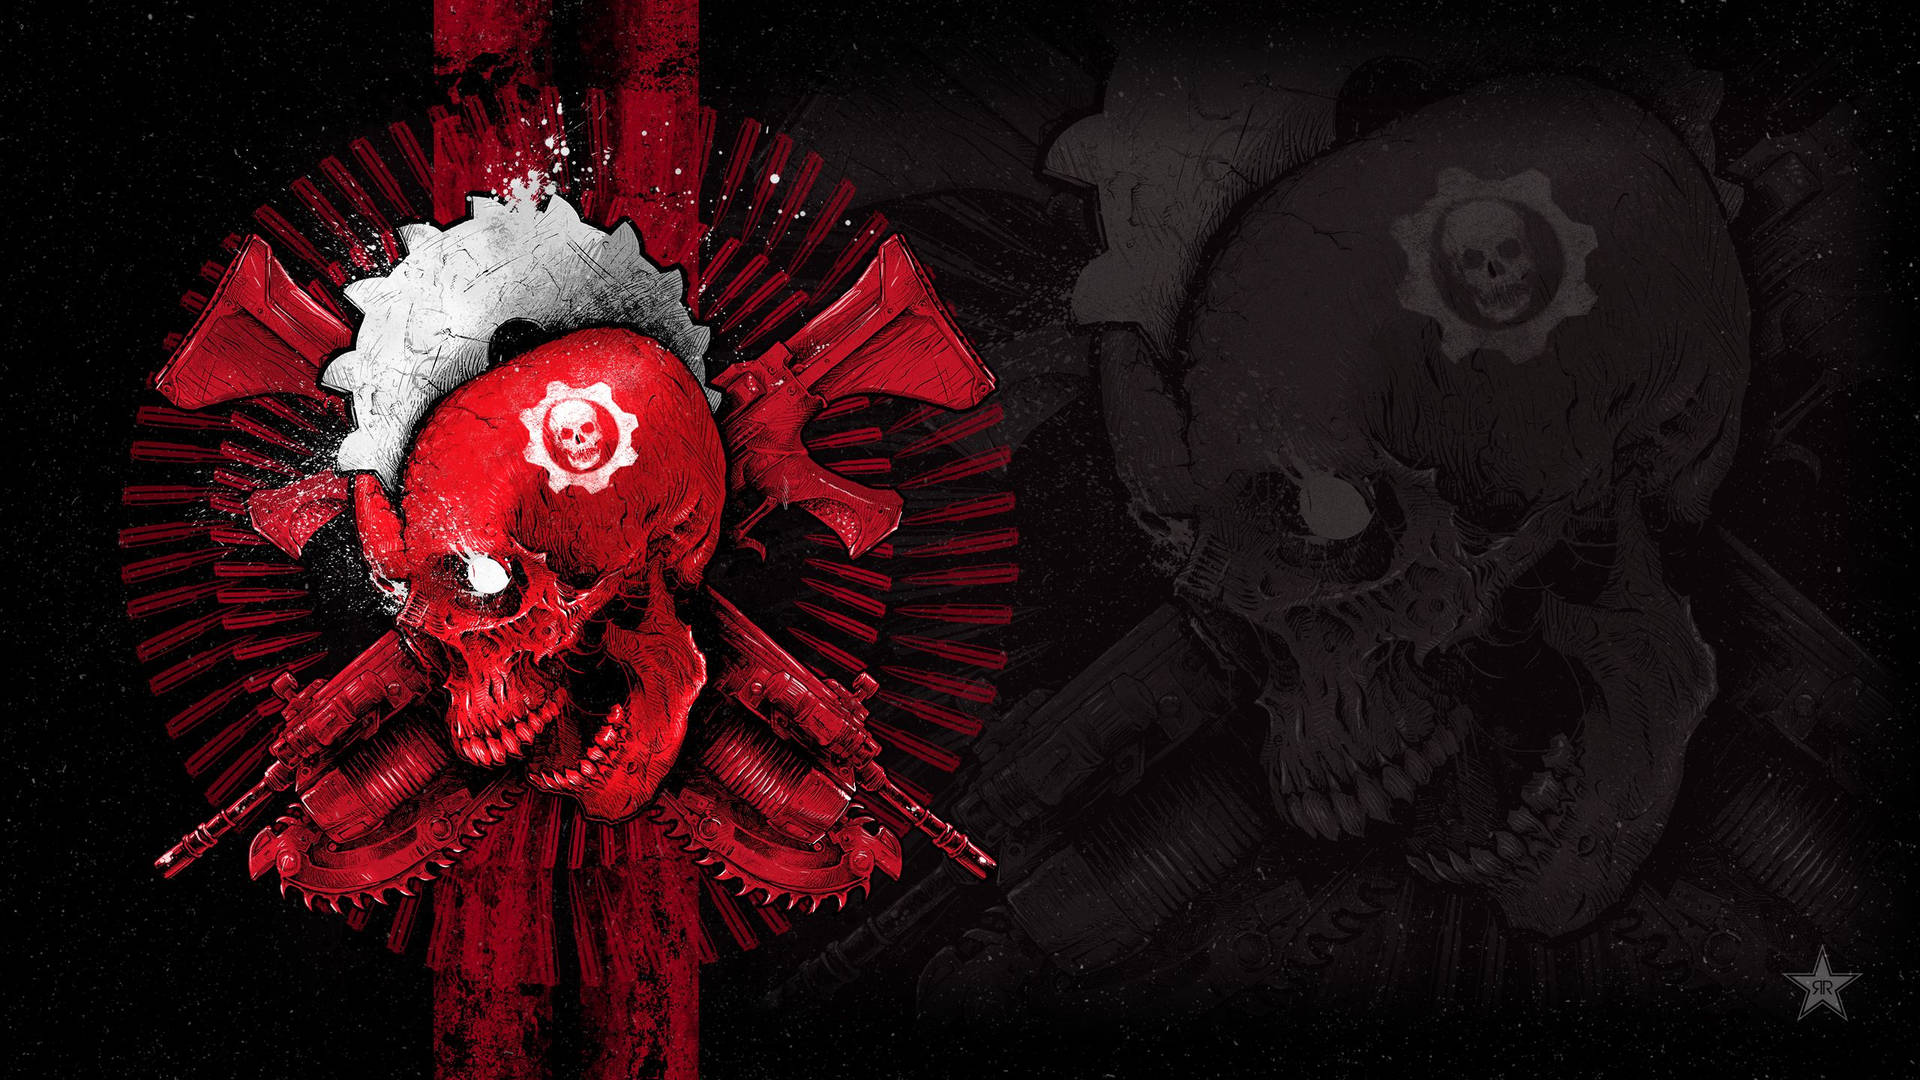 Gears Of War 2560X1440 Wallpaper and Background Image